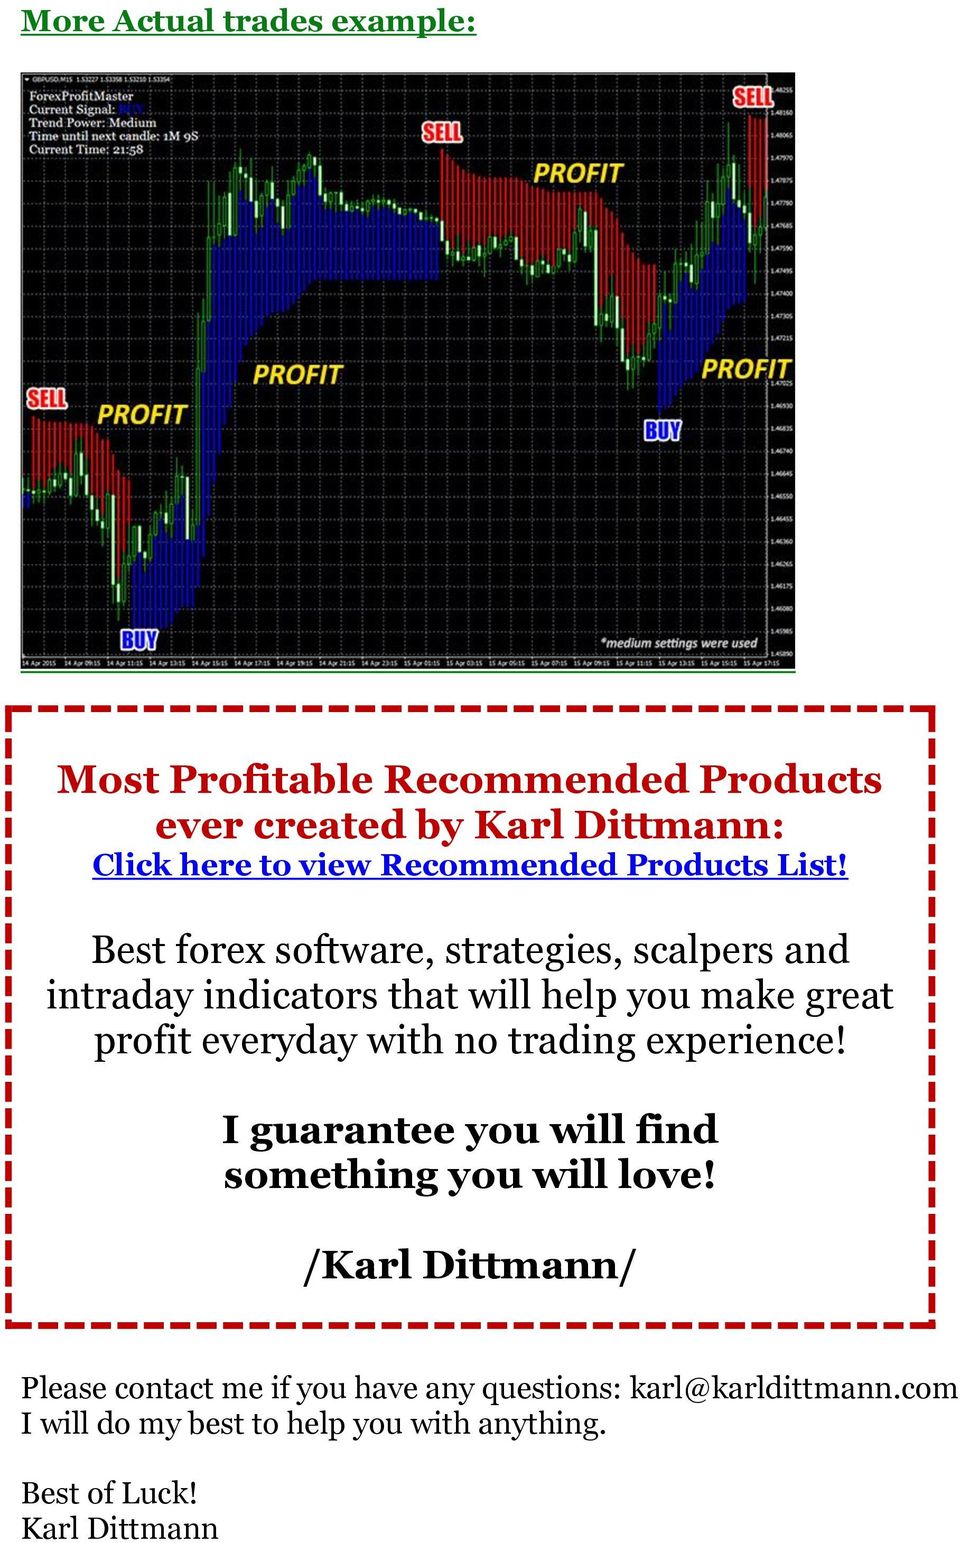 Best forex software, strategies, scalpers and intraday indicators that will help you make great profit everyday with no